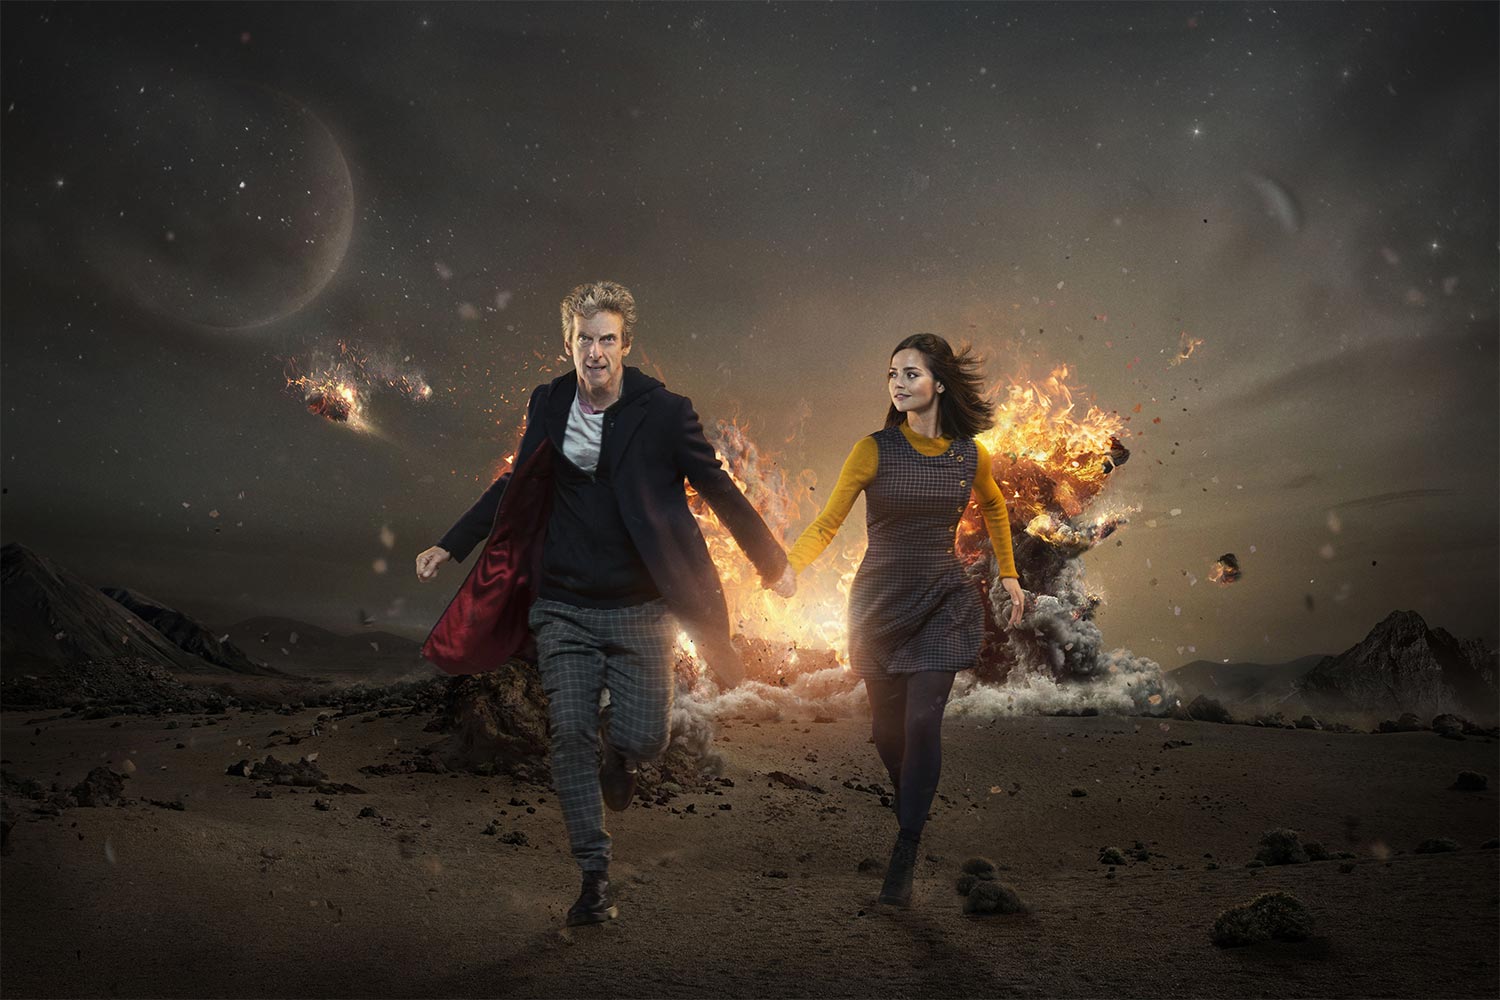 http://images.critictoo.com/wp-content/uploads/2015/08/doctor-who-saison-9-episode-1.jpg